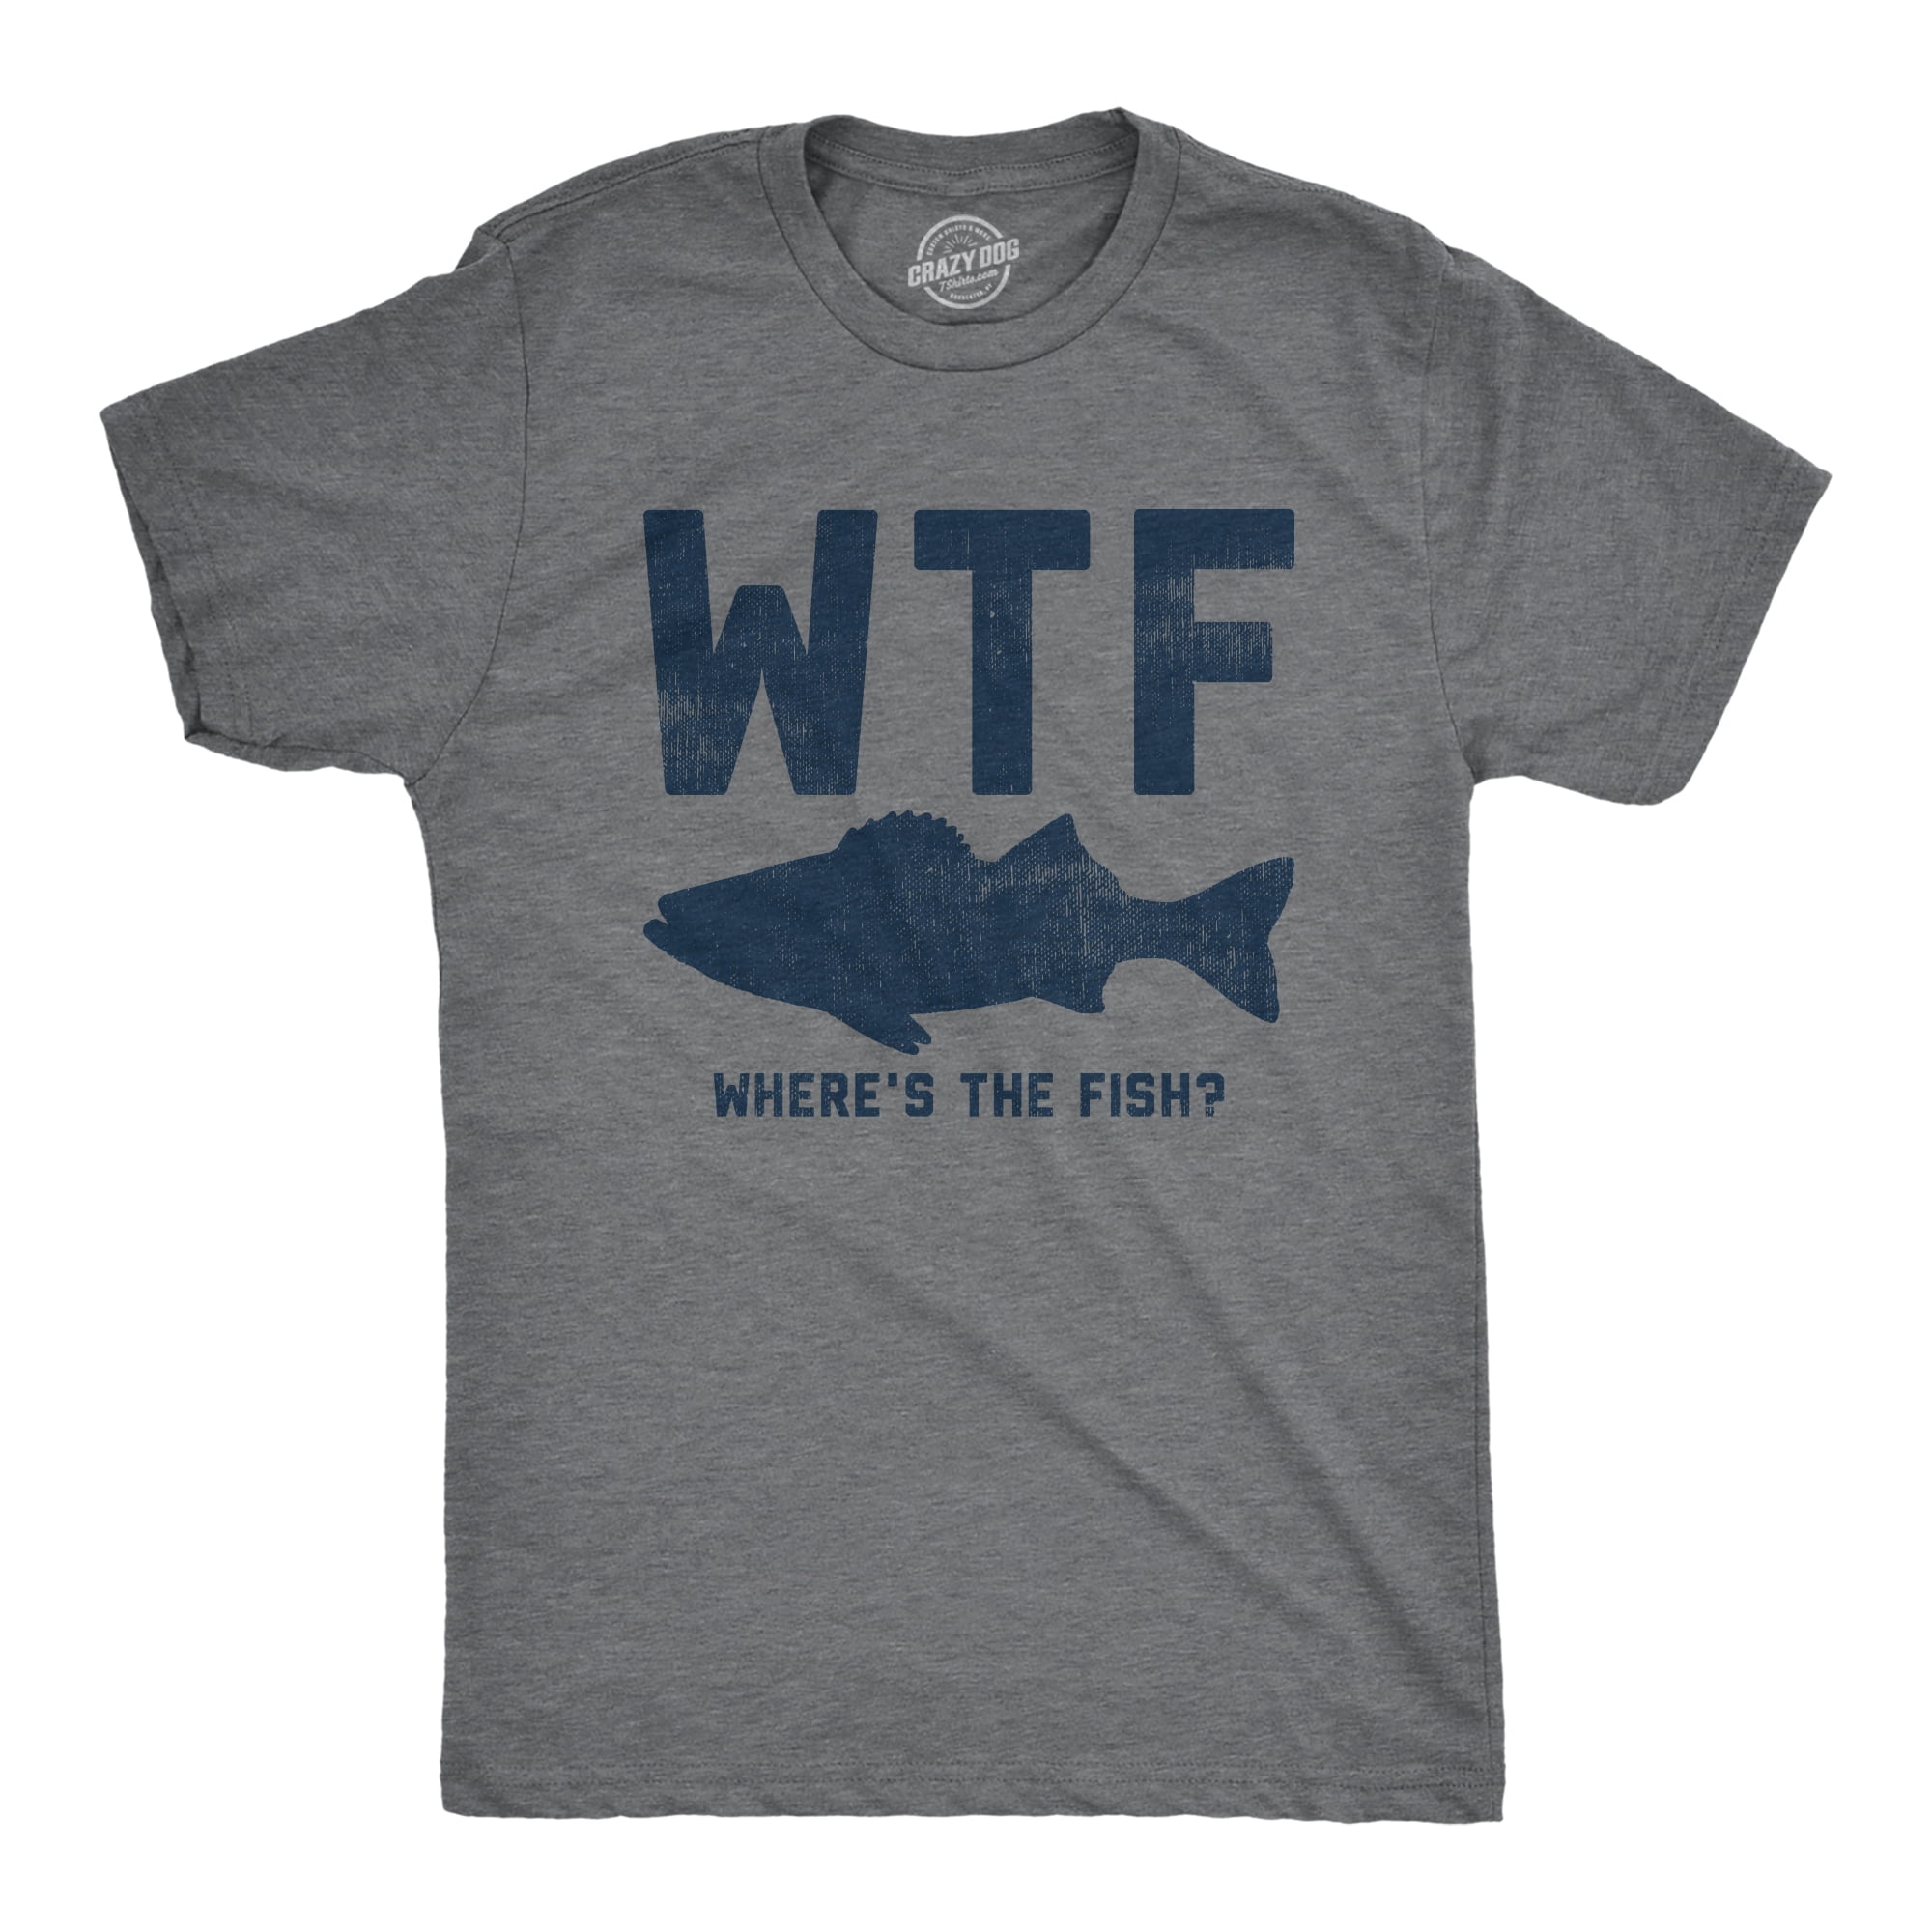 Does This Lure Make My Bass Look Big Funny Fishing Shirts – That's A Cool  Tee